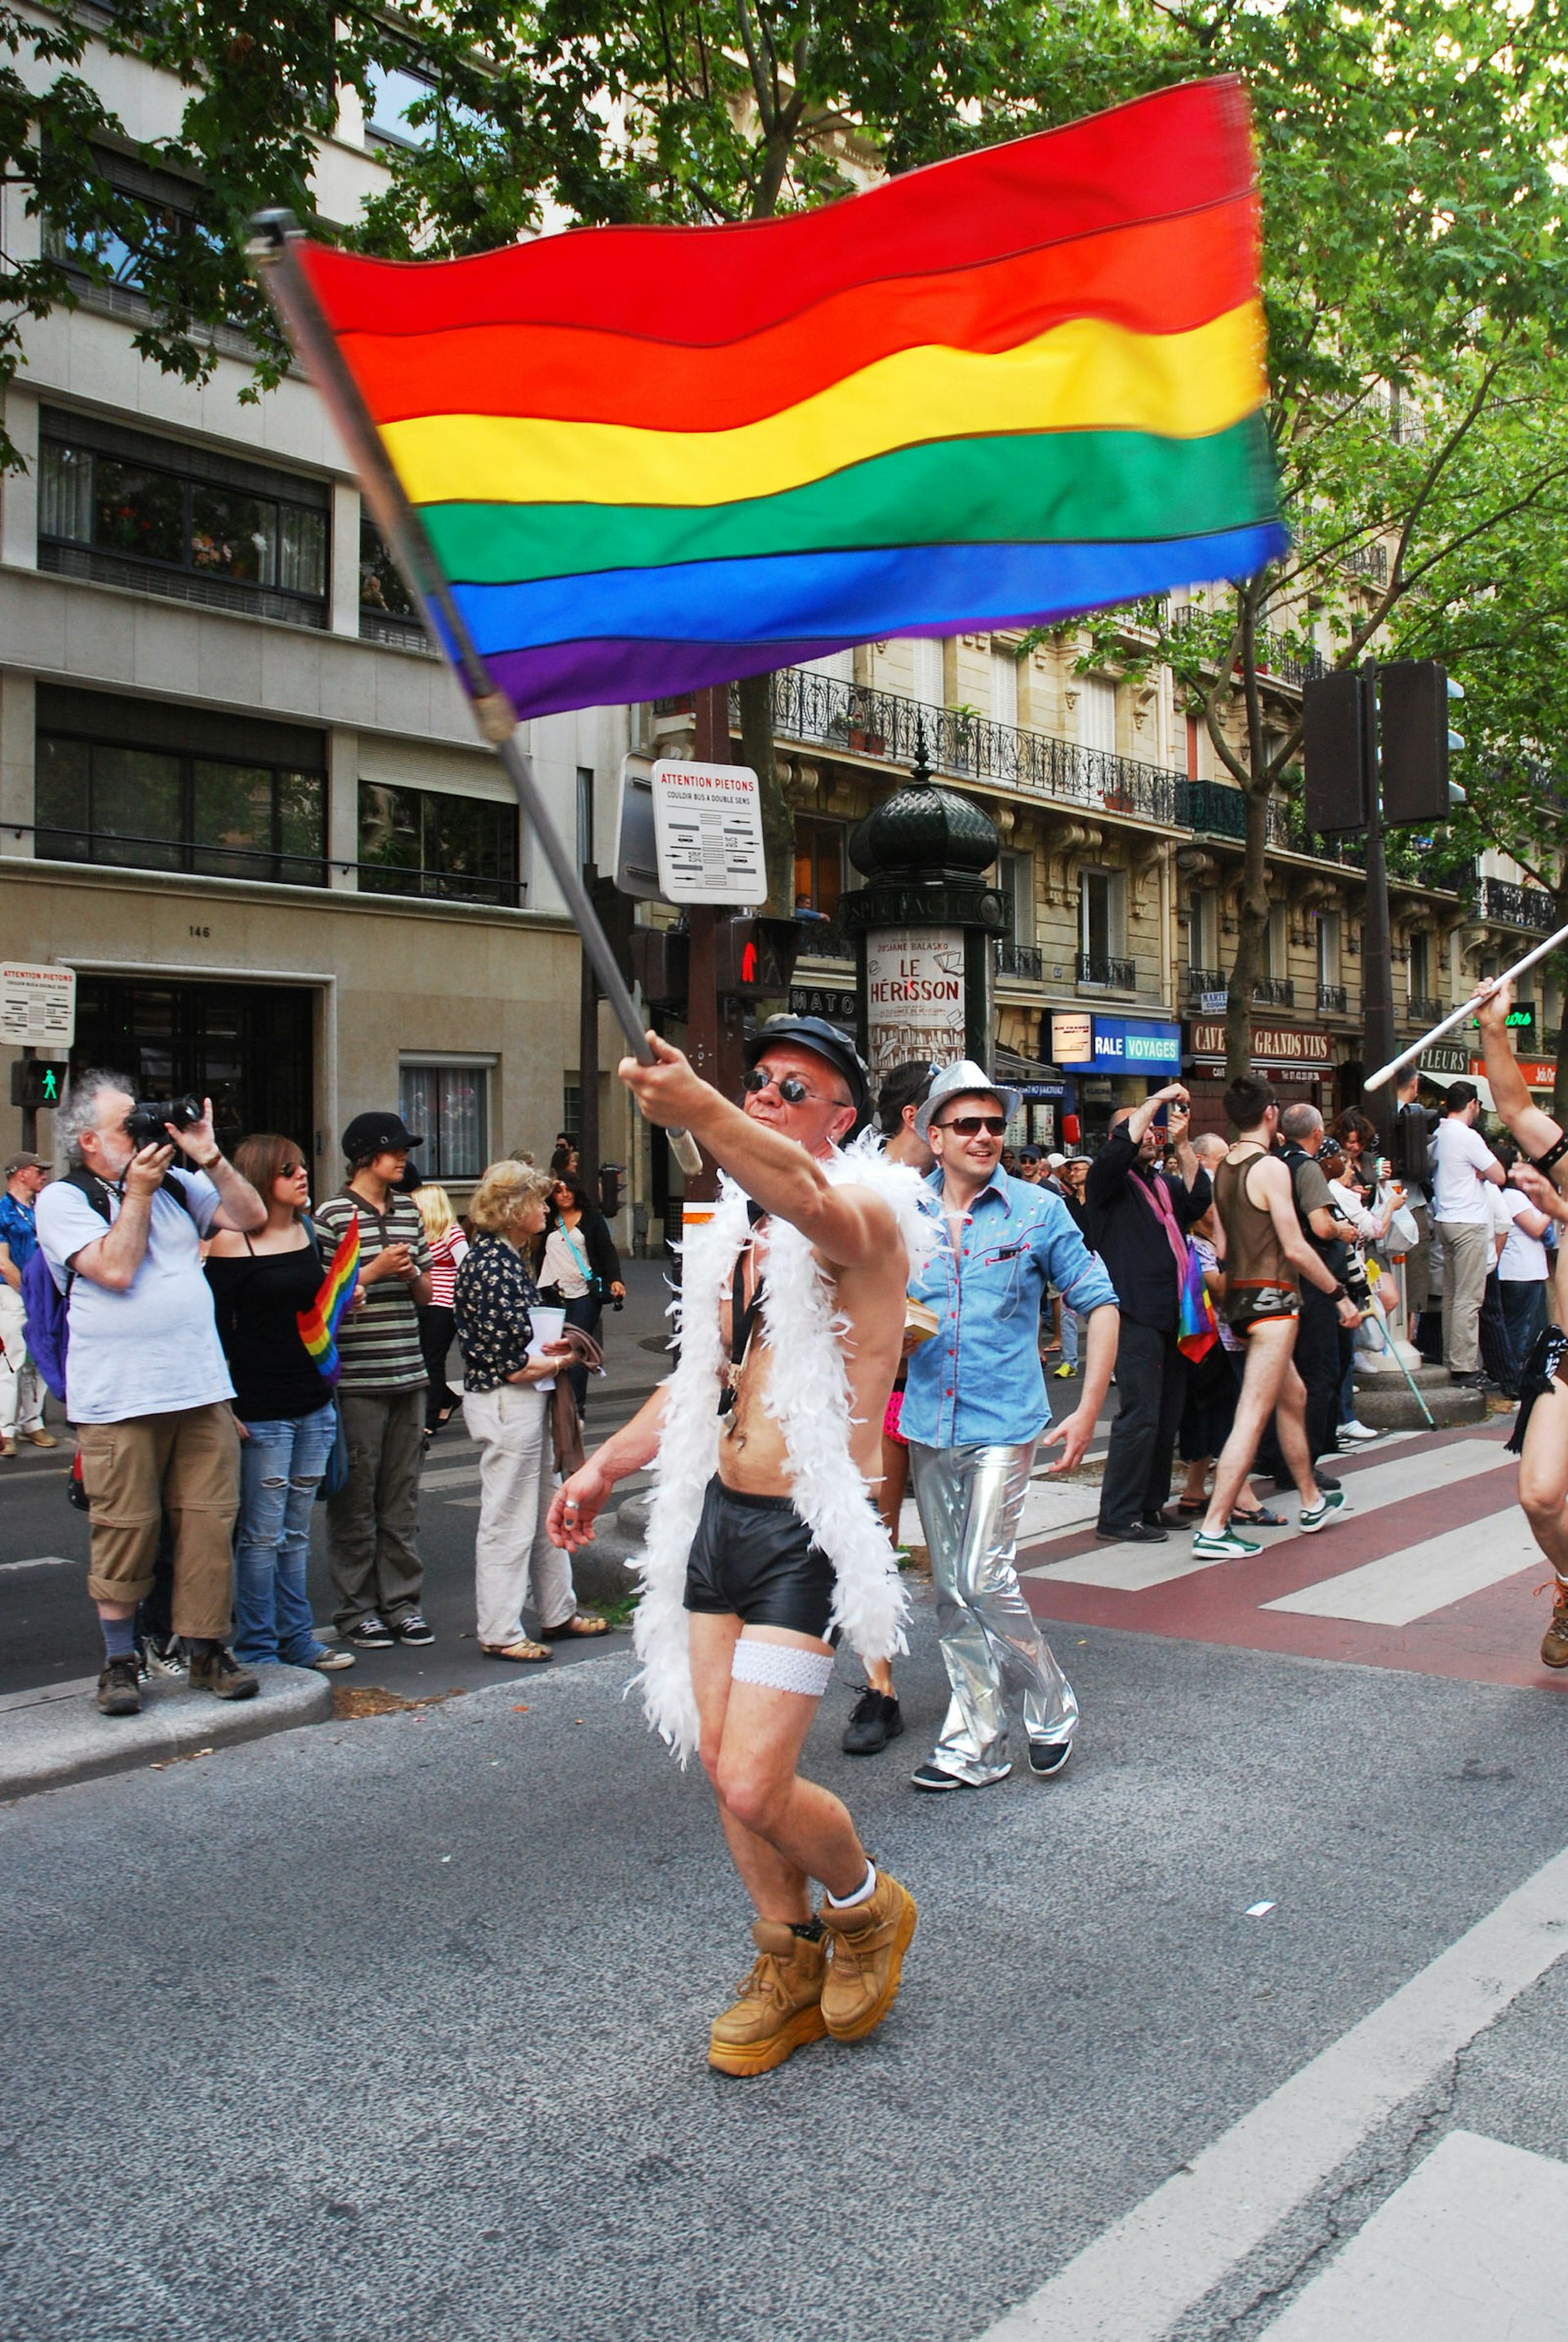 Pride in Europe: A Pride festival goer walks the streets of Paris with a rainbow flag © Olga Besnard / Shutterstock